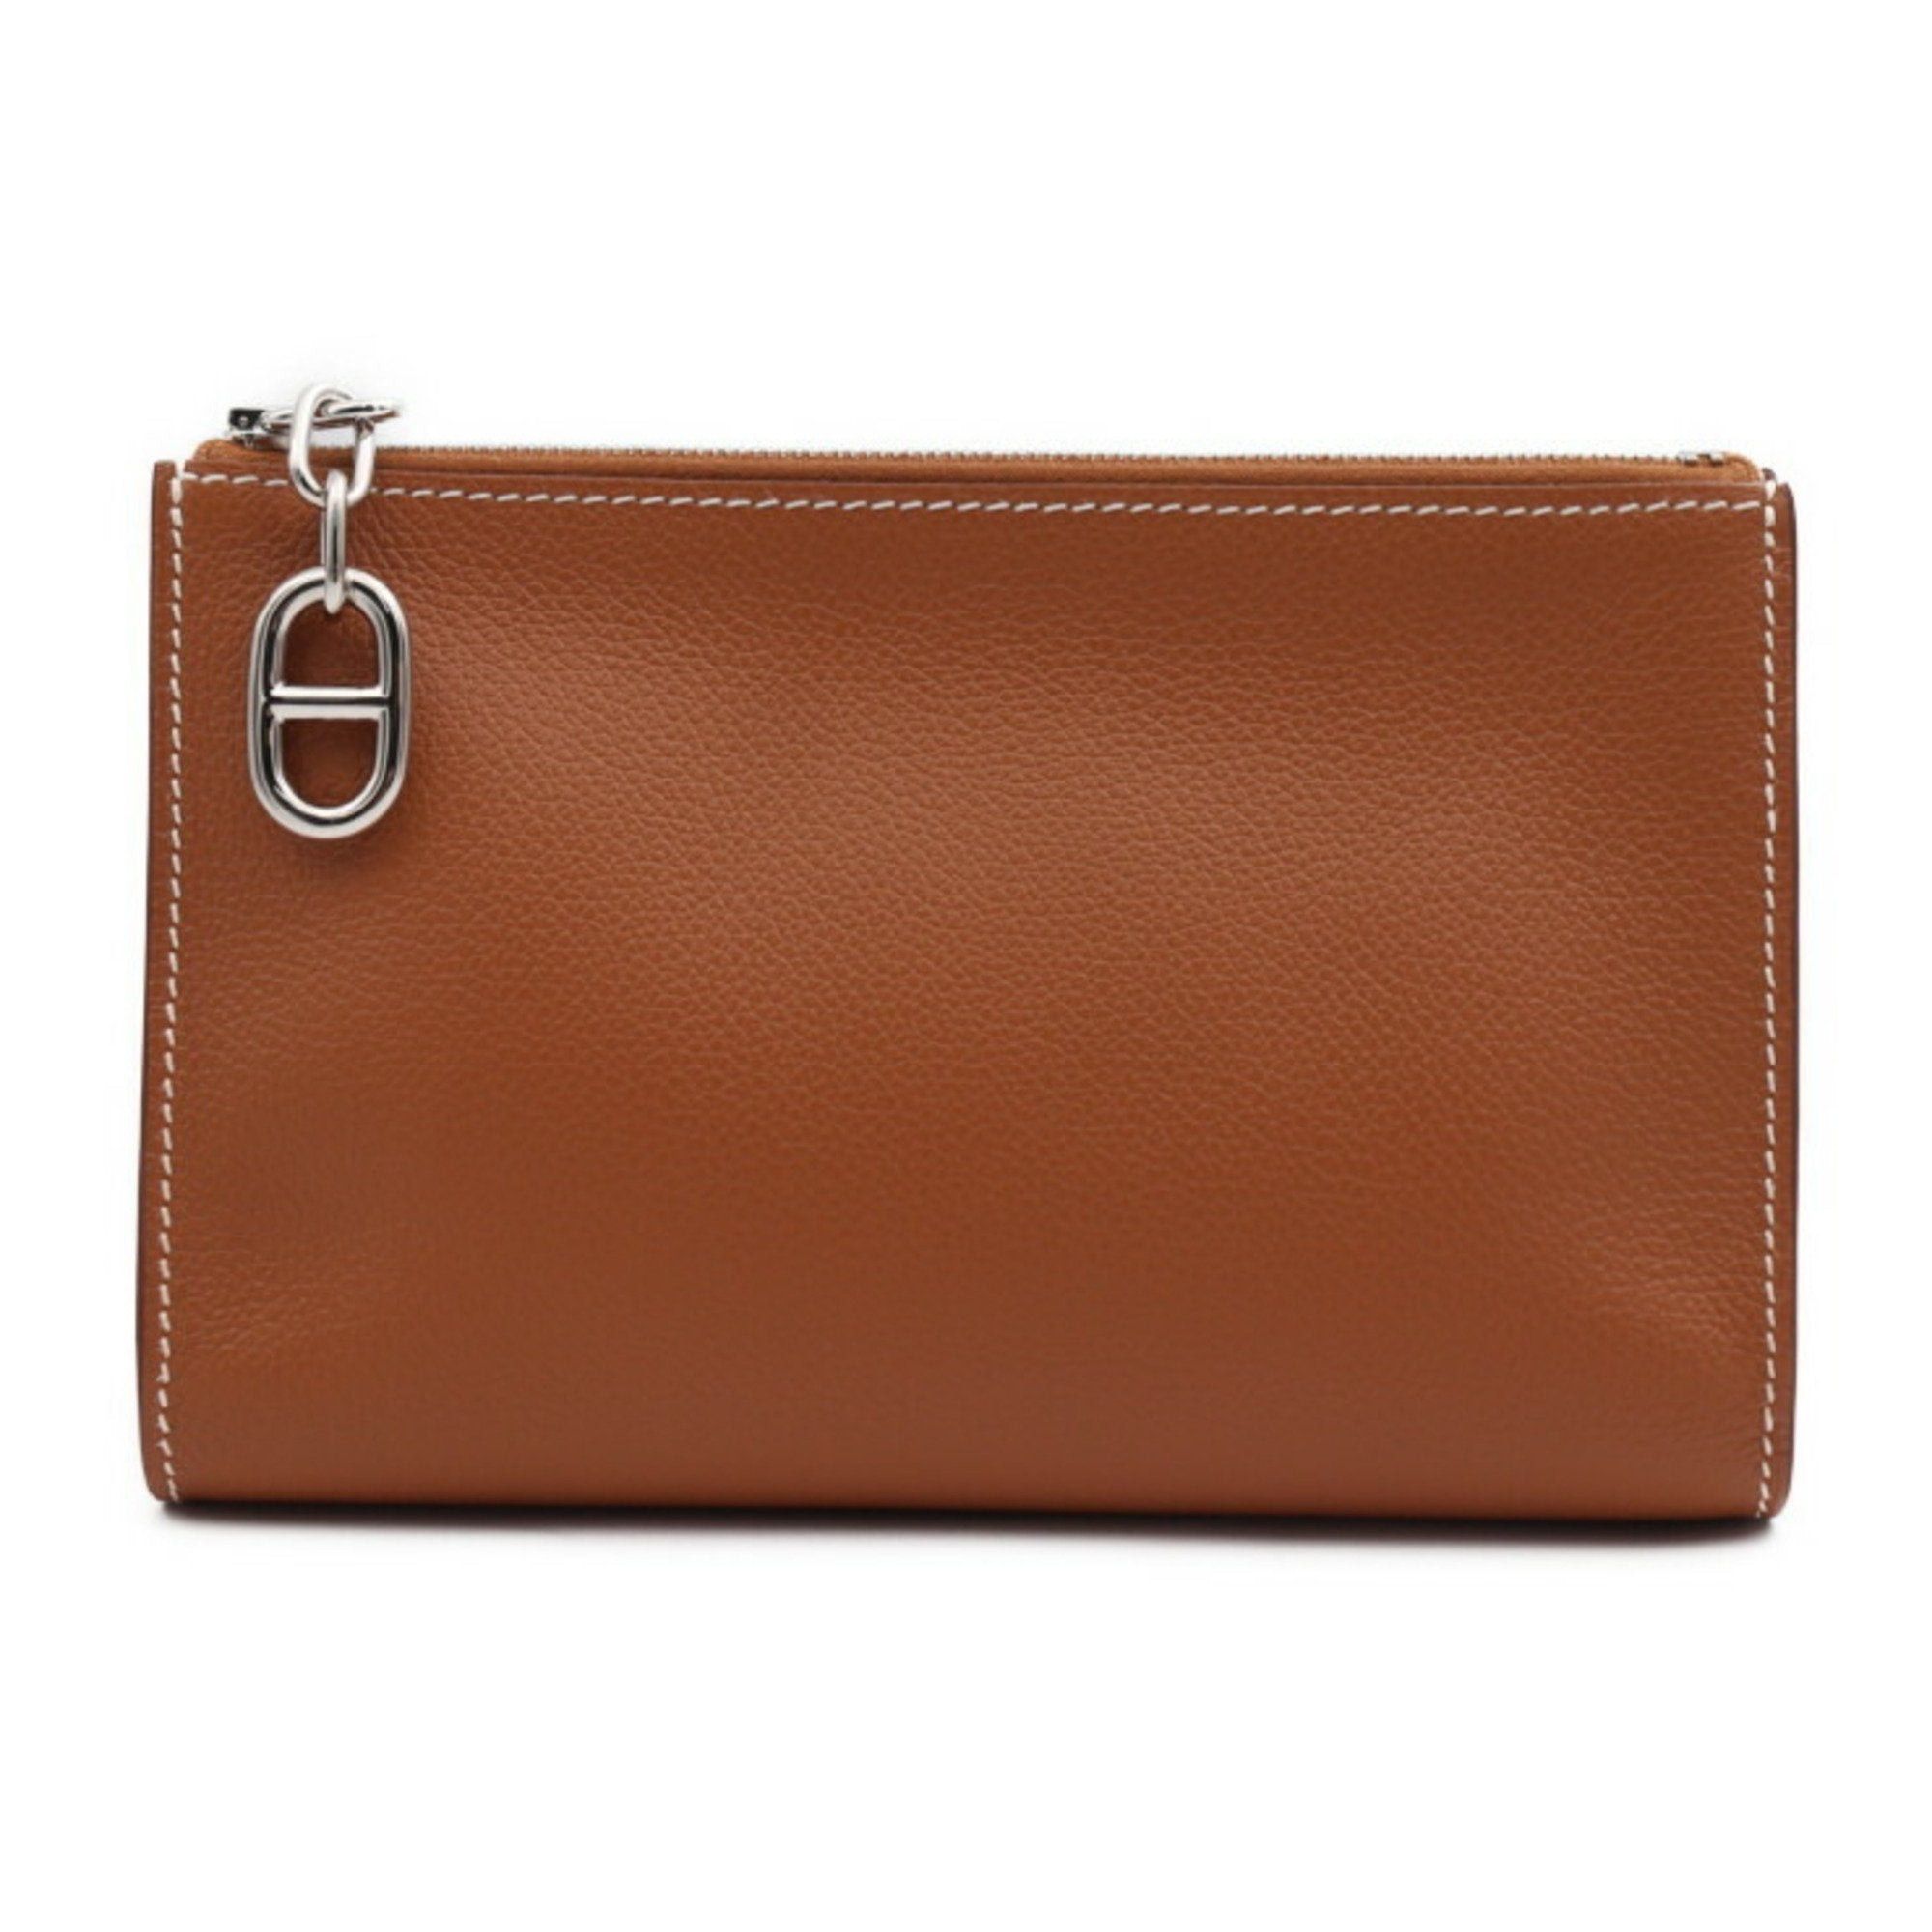 image of Hermes Zip Angor Pm Pouch Second Bag Evercolor Gold Brown Clutch Chaine D'ancle B Engraved, Women's